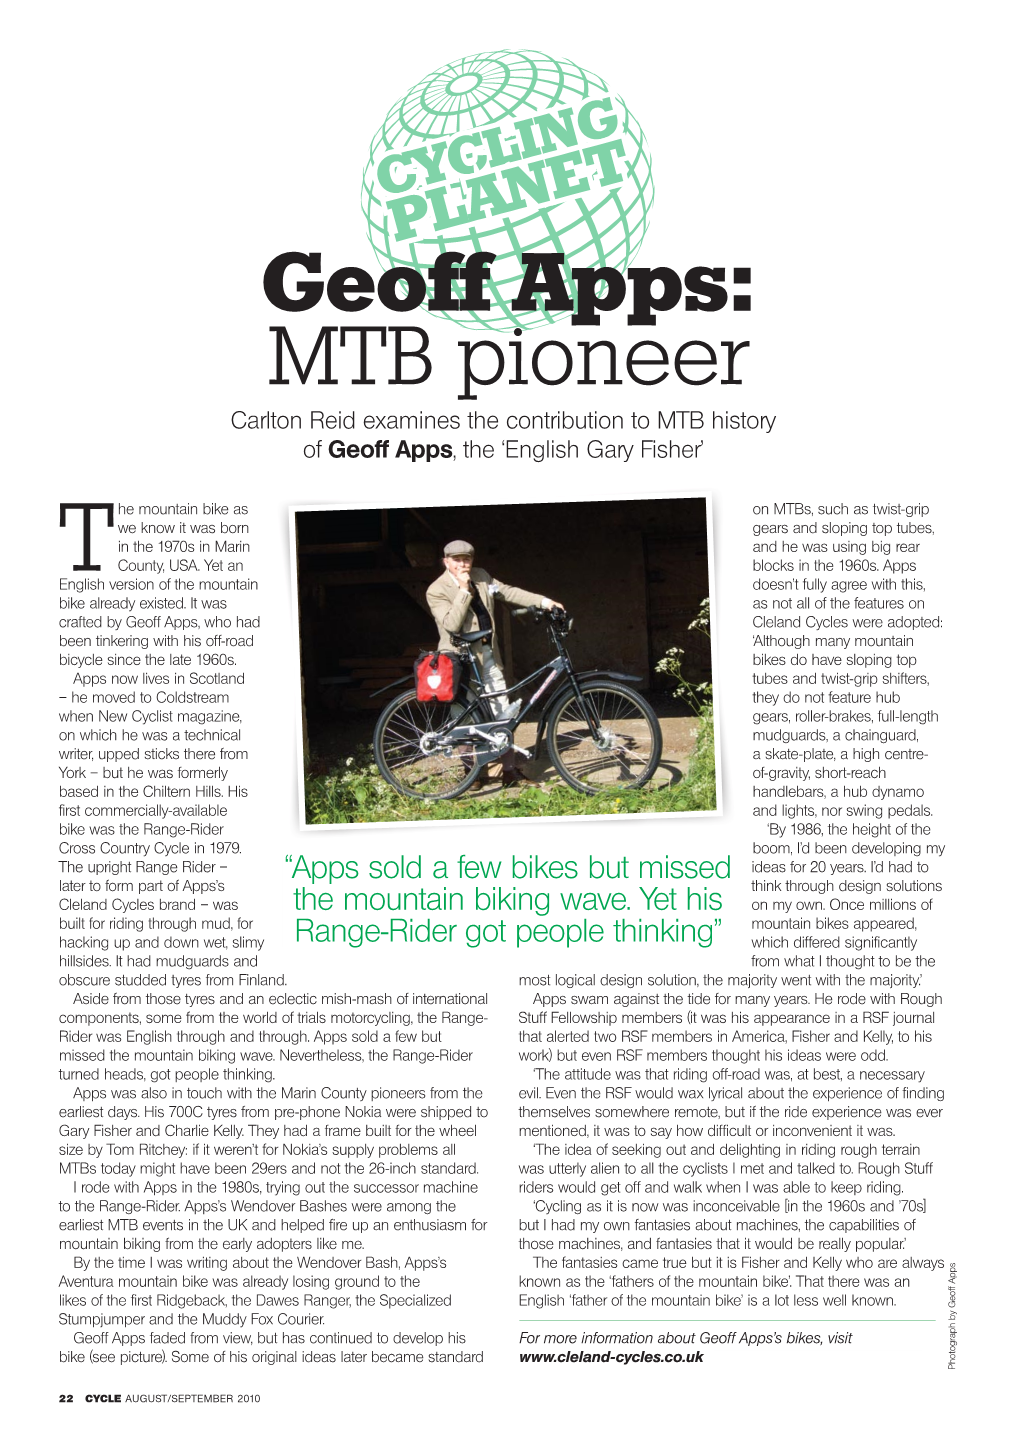 Geoff Apps: MTB Pioneer Carlton Reid Examines the Contribution to MTB History of Geoff Apps, the ‘English Gary Fisher’